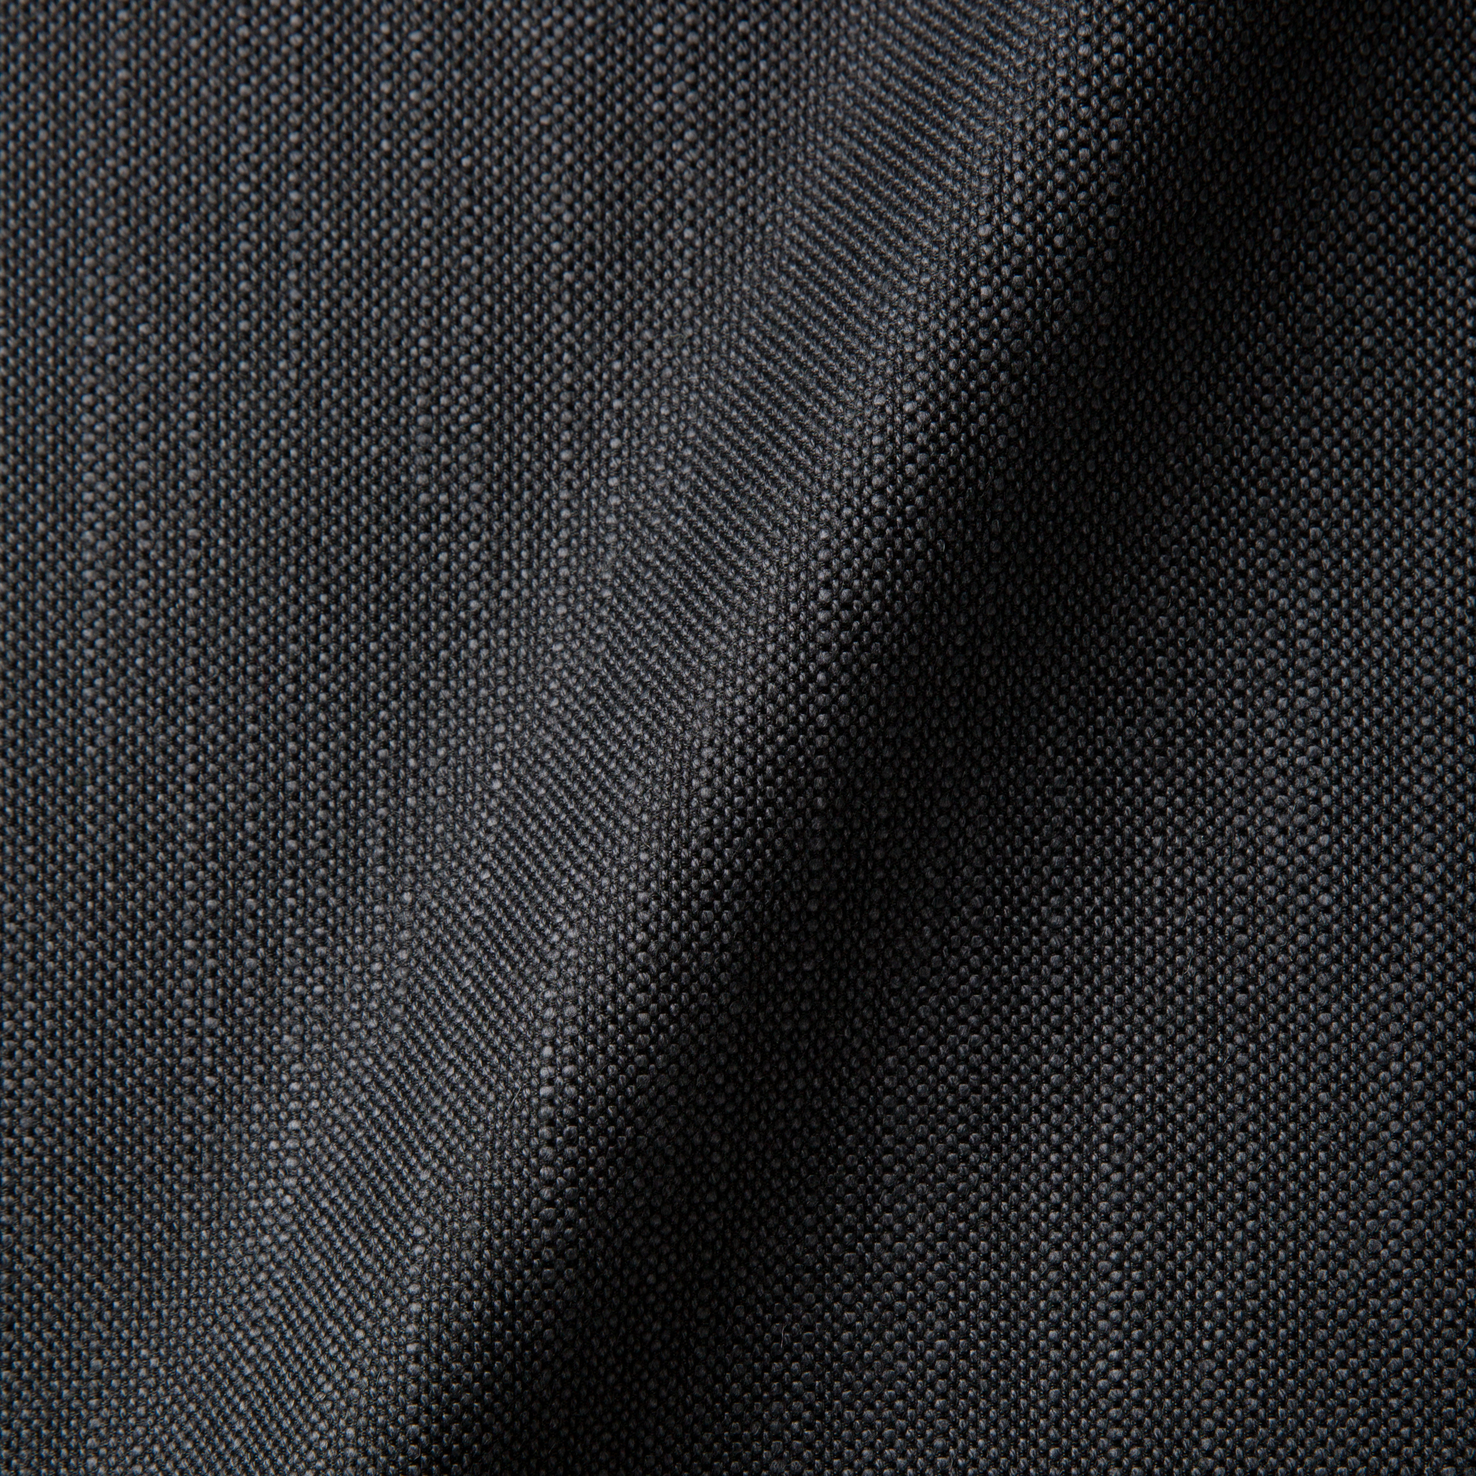 Fabric sample Macchedil Sottile Anthracite